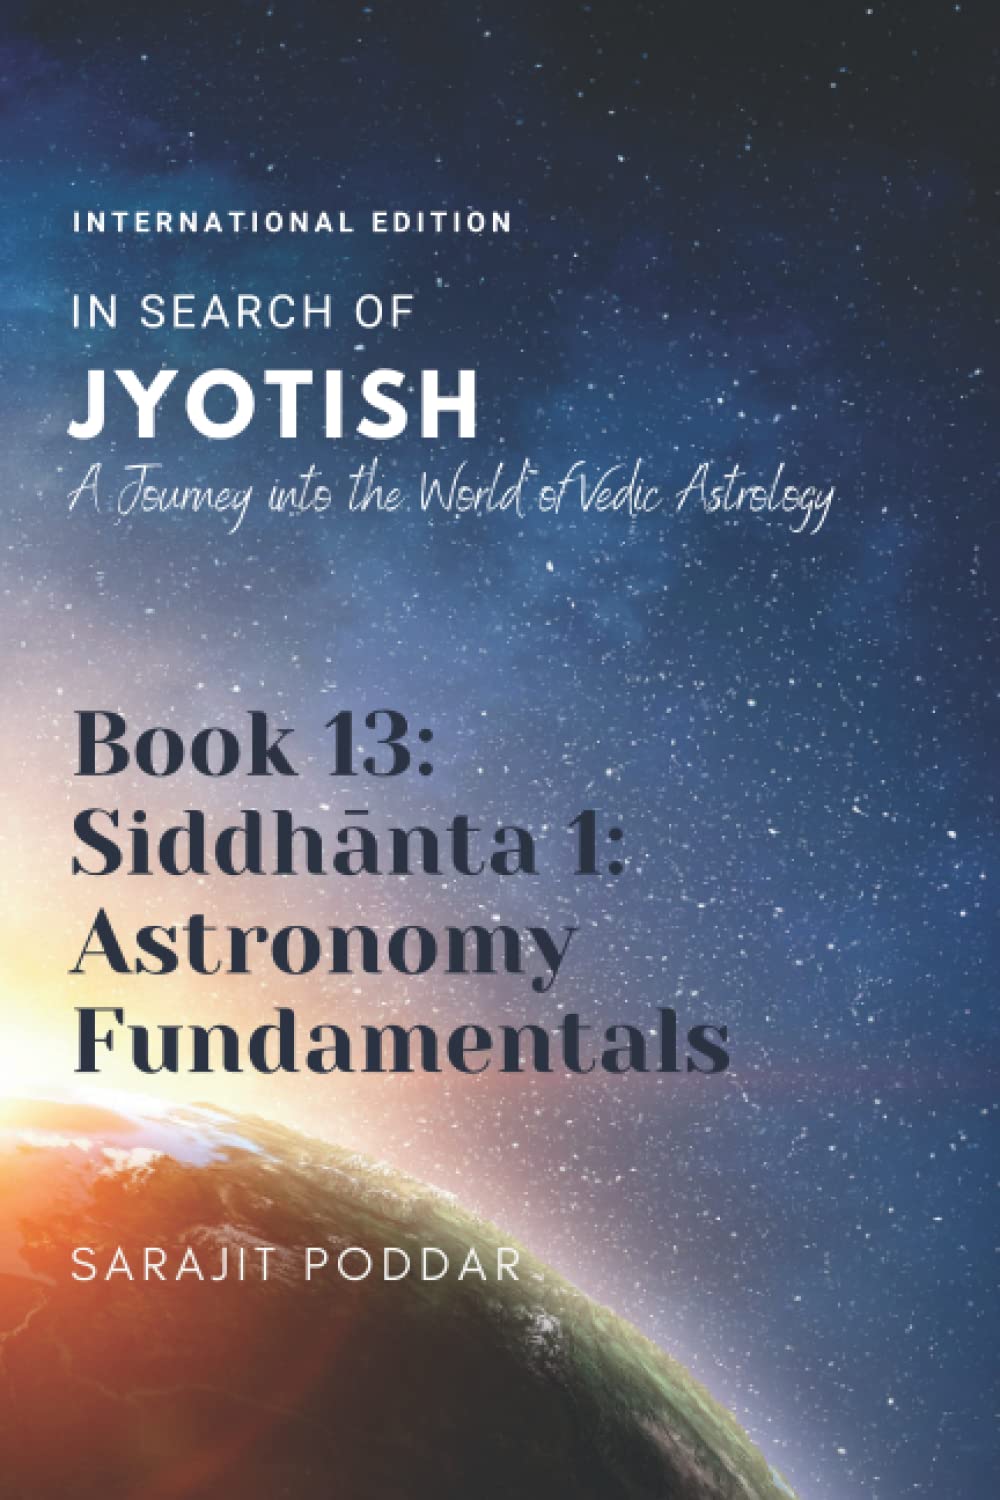 Siddhanta 1: Astronomy Fundamentals: A Journey into the World of Vedic Astrology